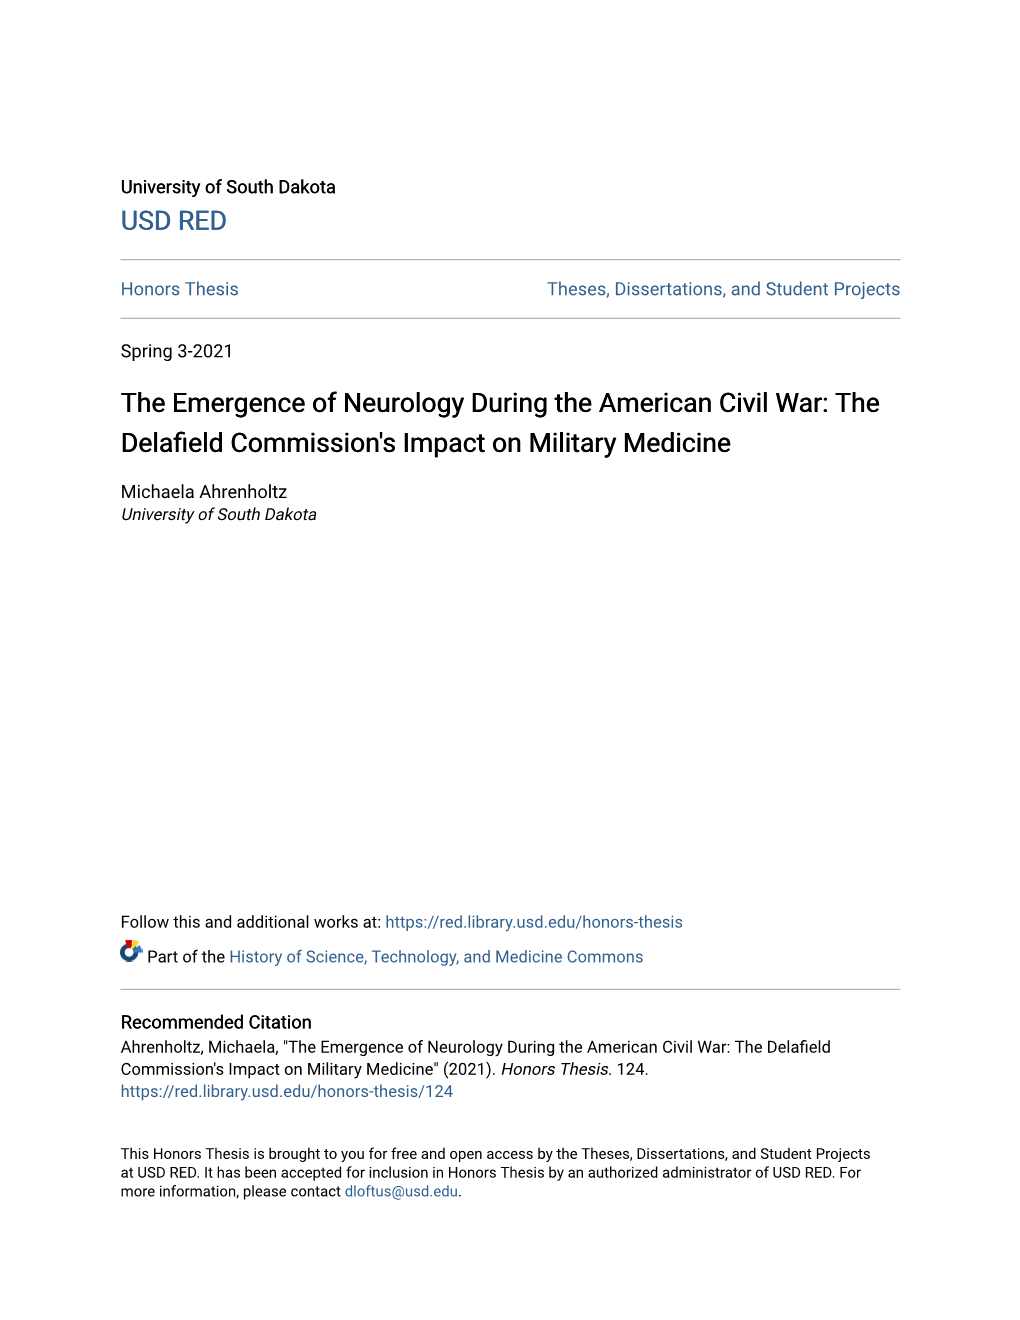 The Emergence of Neurology During the American Civil War: the Delafield Commission's Impact on Military Medicine